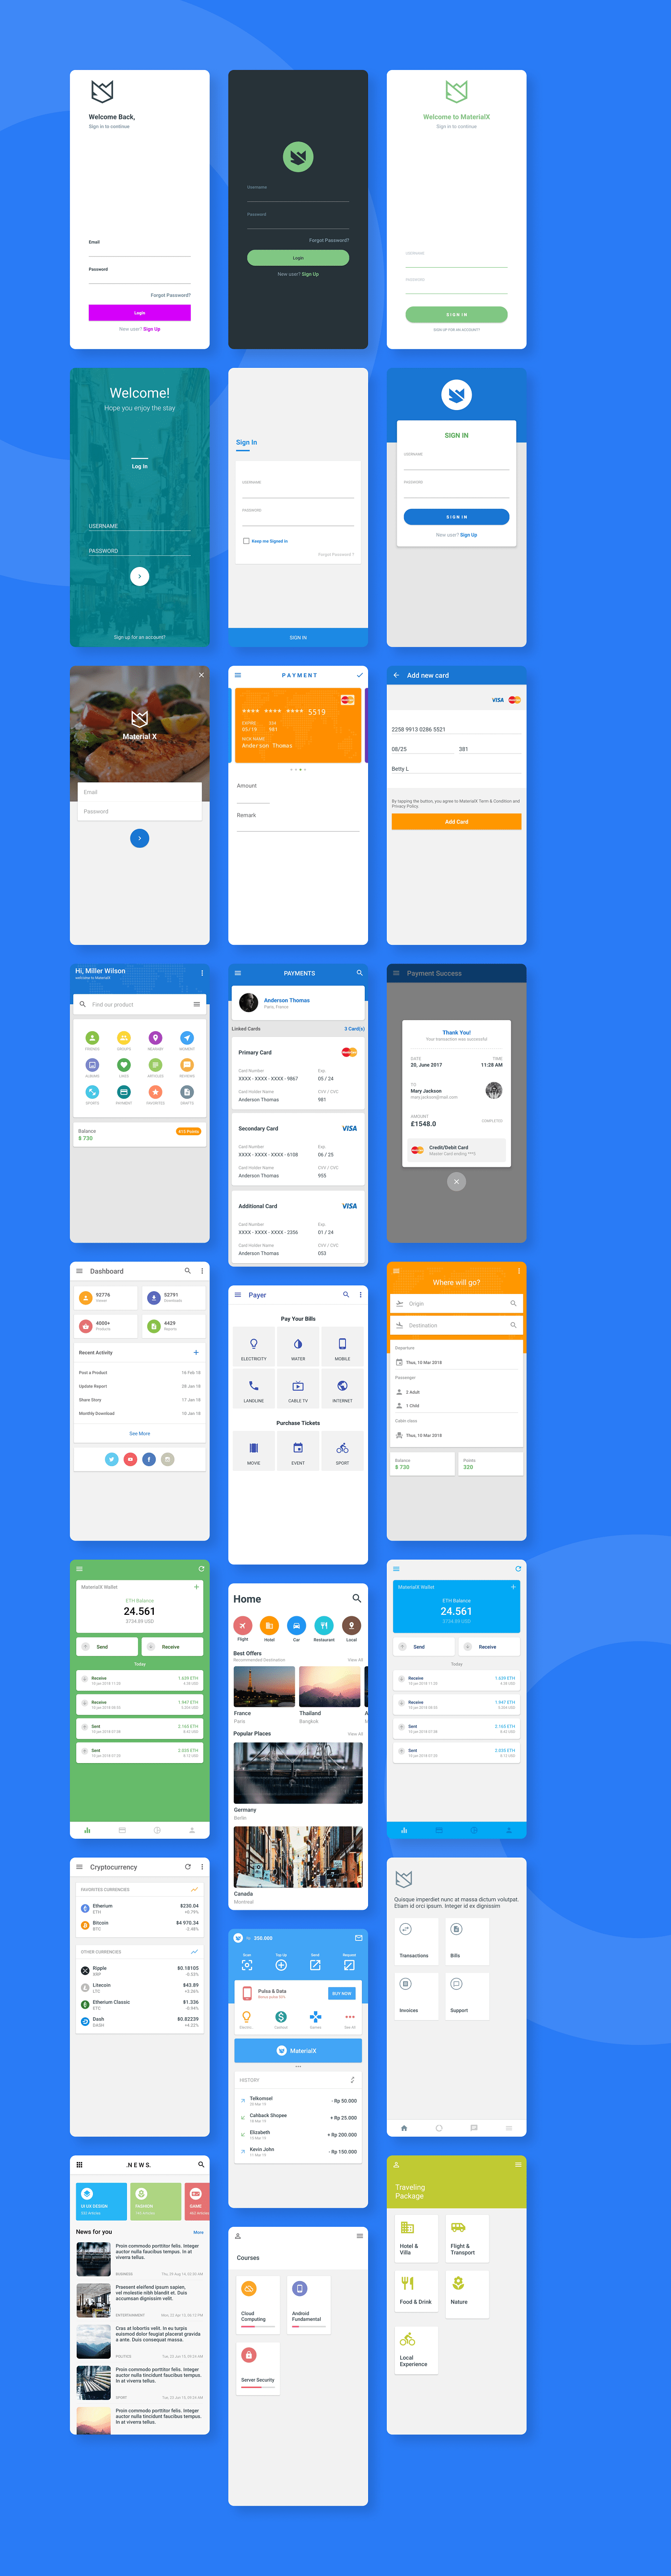 MaterialX - Android Material Design UI Components 2.7 - 32